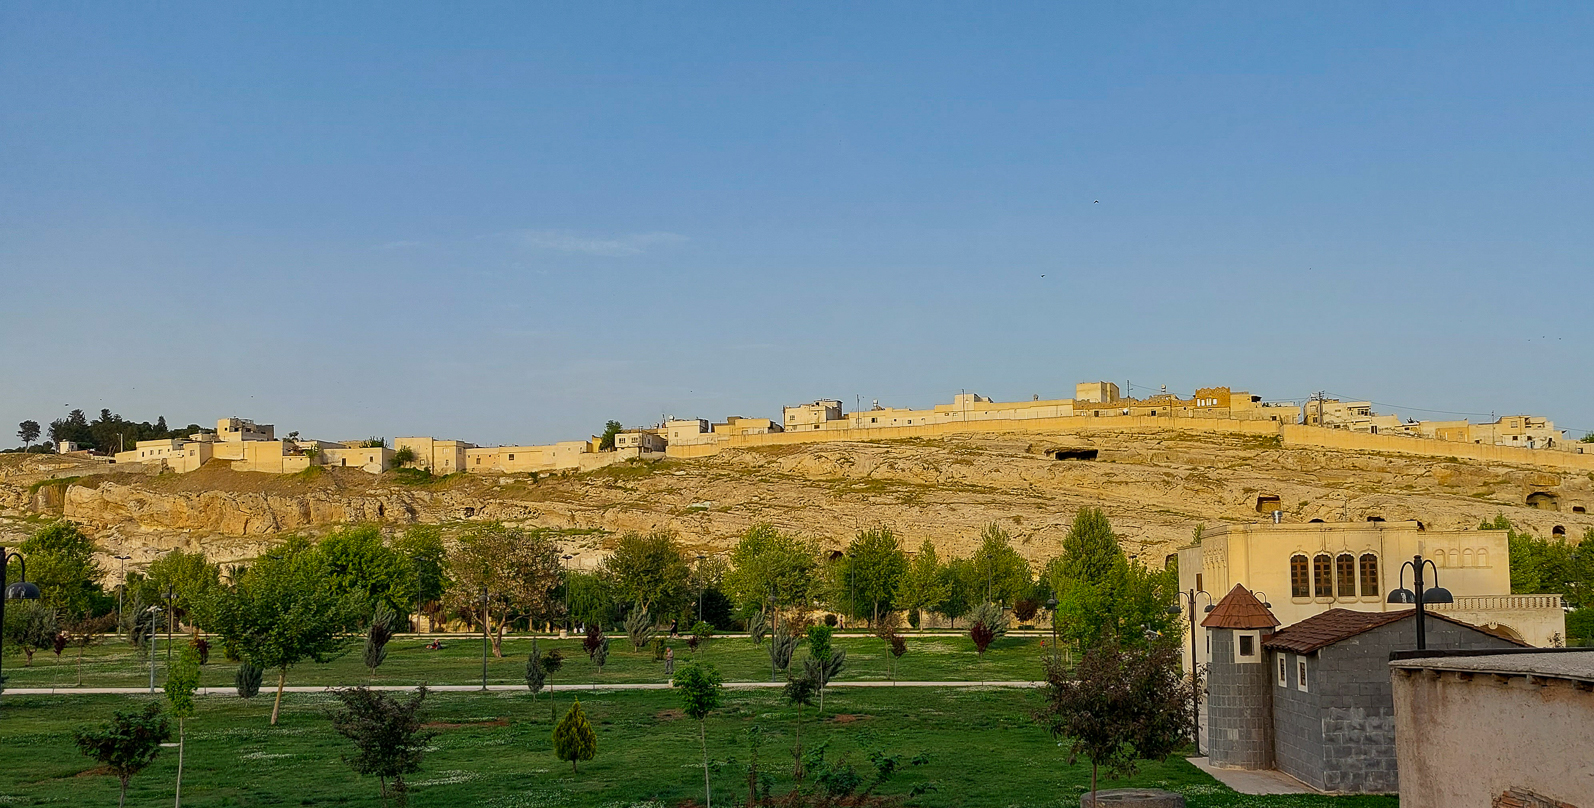 <span  class="uc_style_uc_tiles_grid_image_elementor_uc_items_attribute_title" style="color:#ffffff;">Sanliurfa, city walls</span>